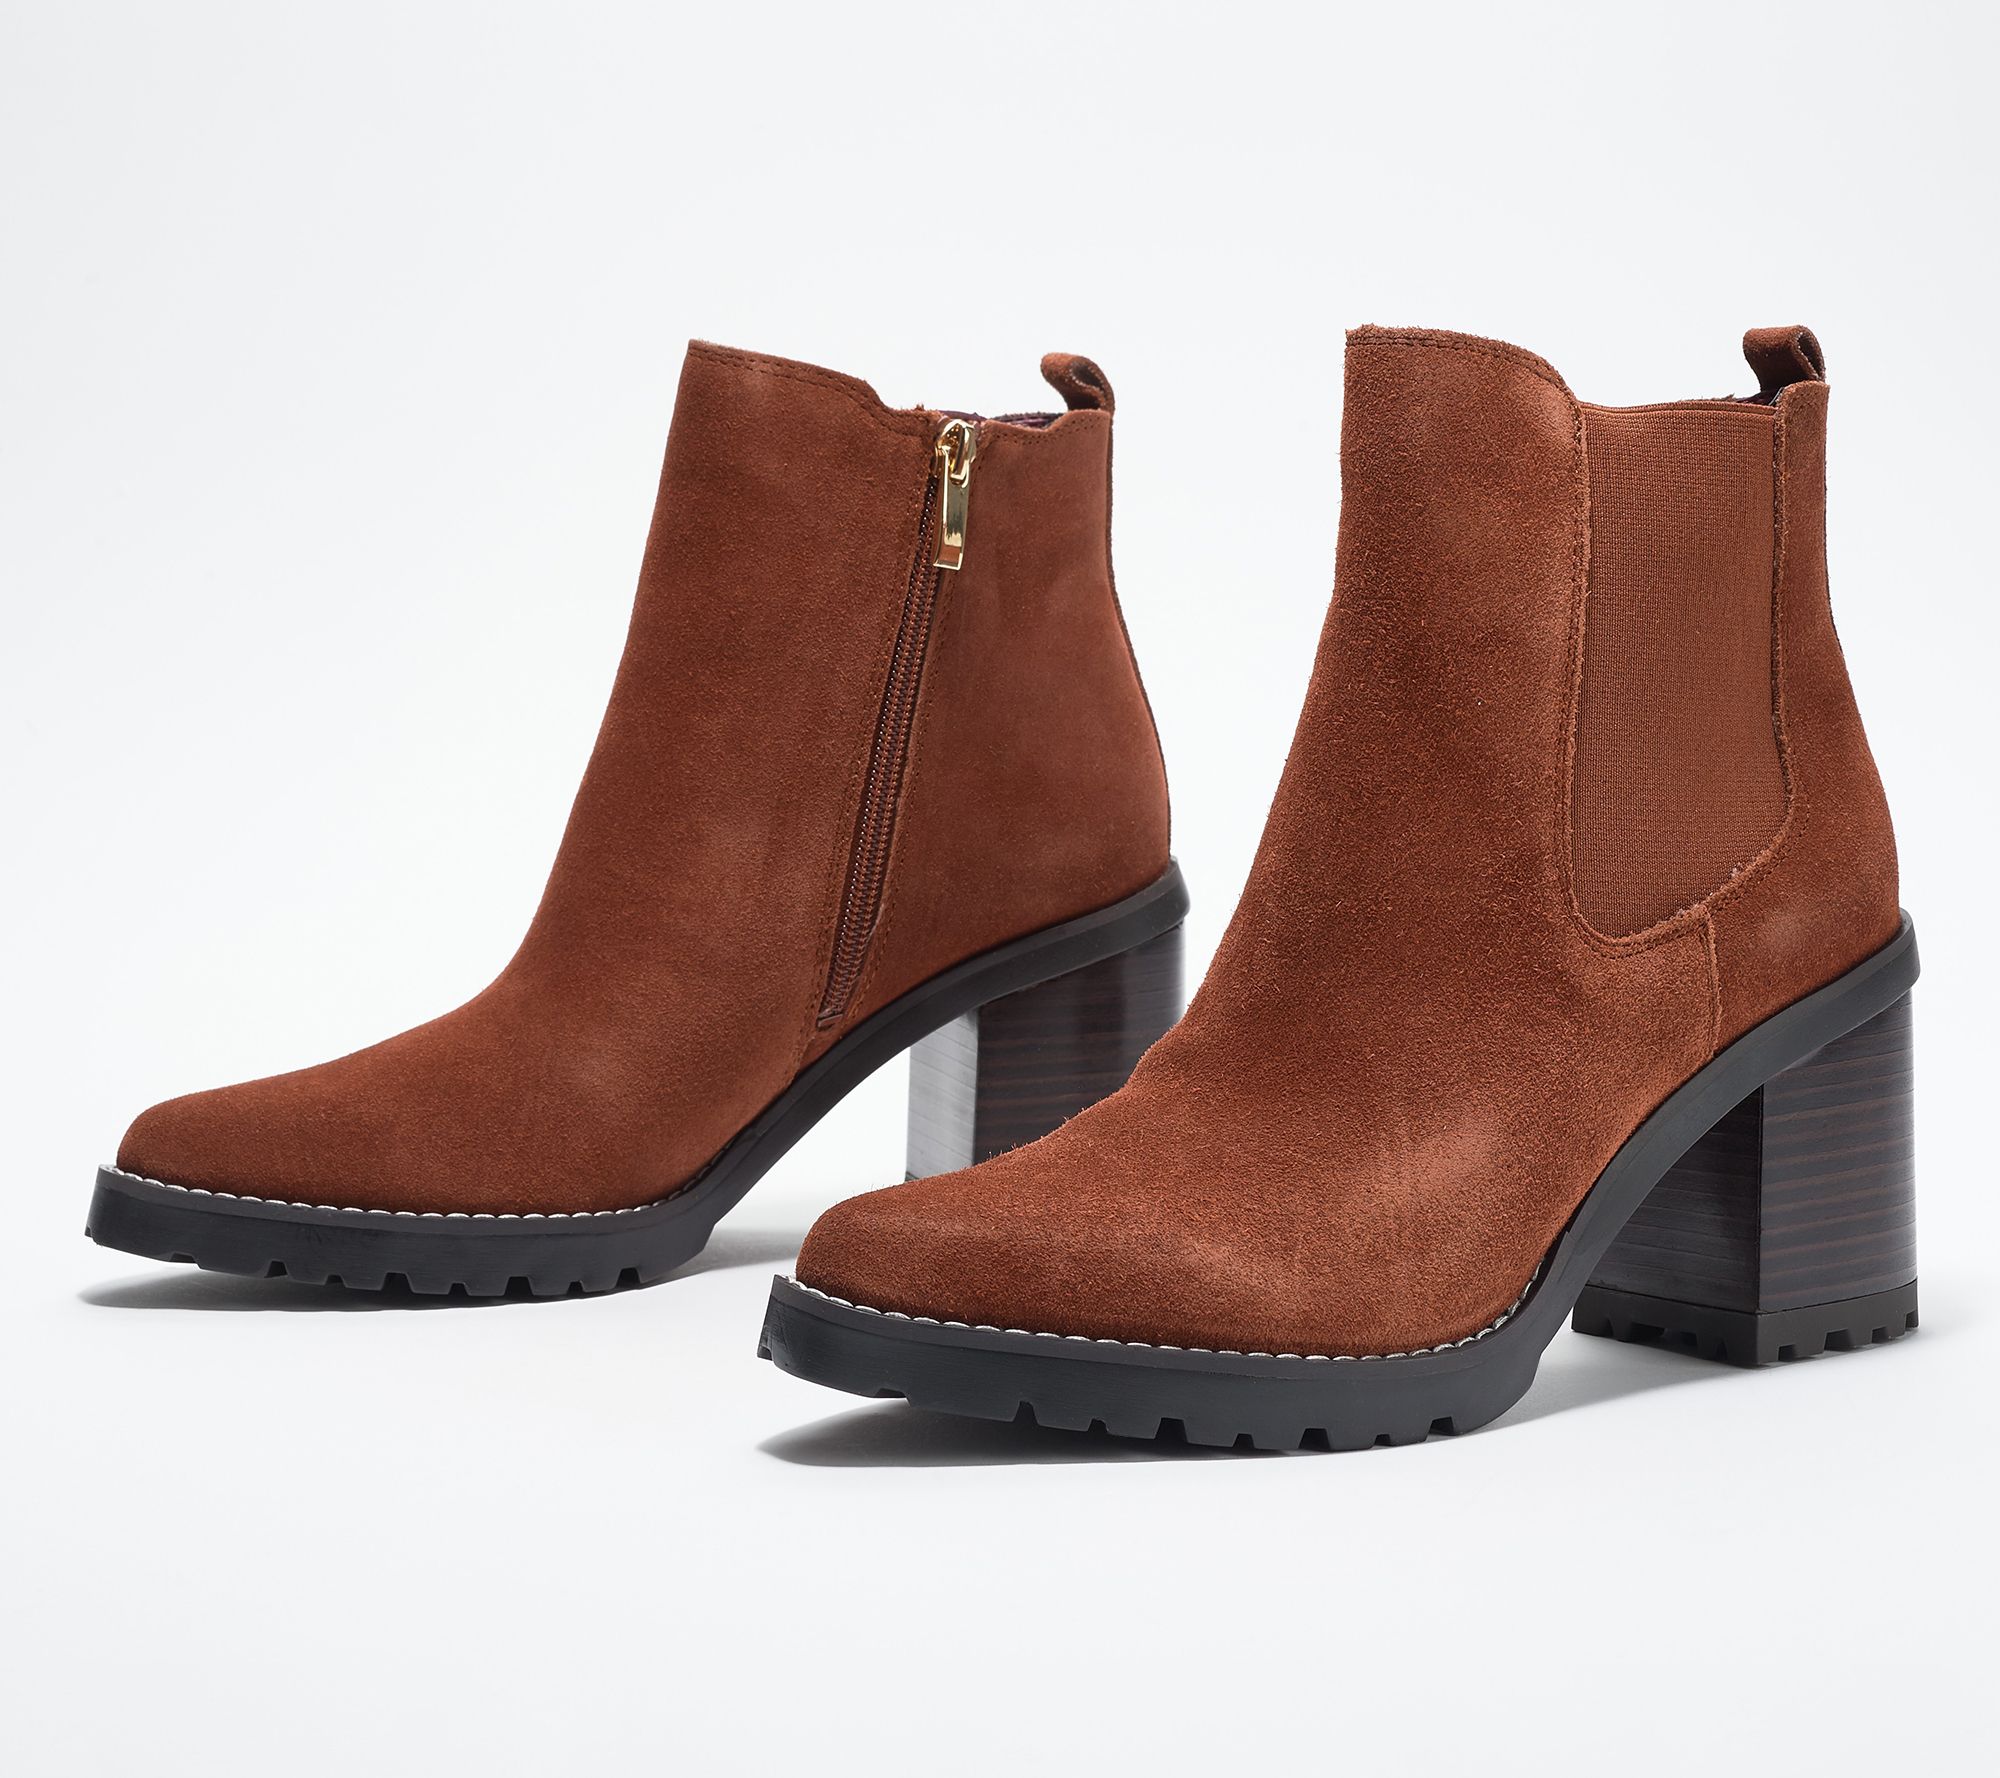 Franco Sarto Suede or Patent Ankle Boots - Trent - QVC.com